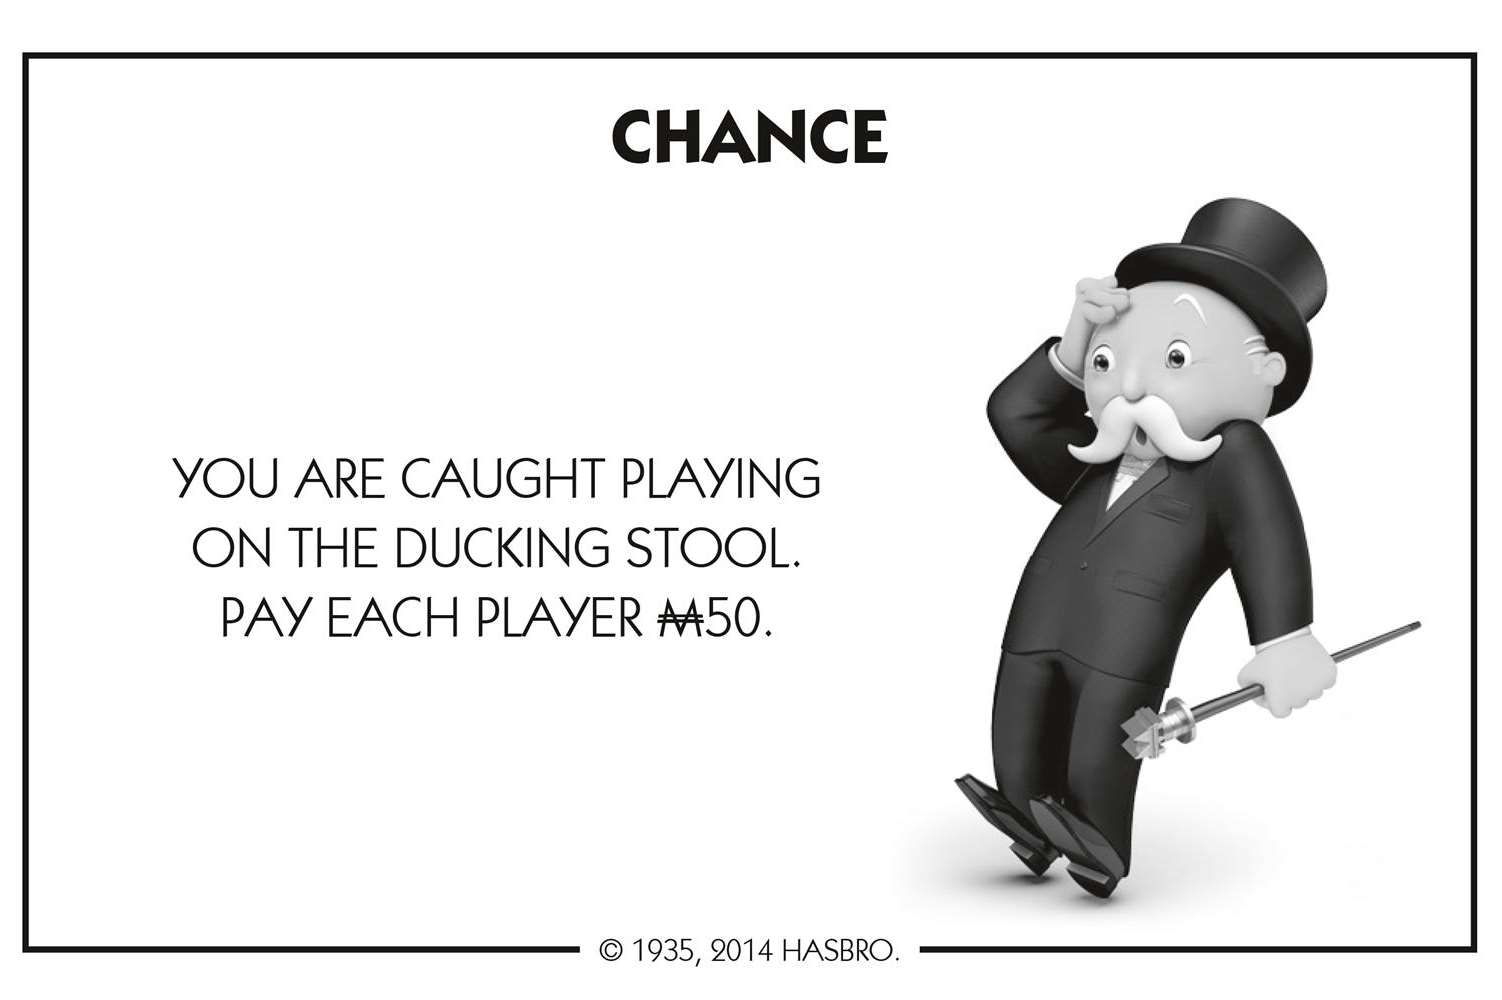 Even the chance cards have been adapted for the Canterbury version of Monopoly